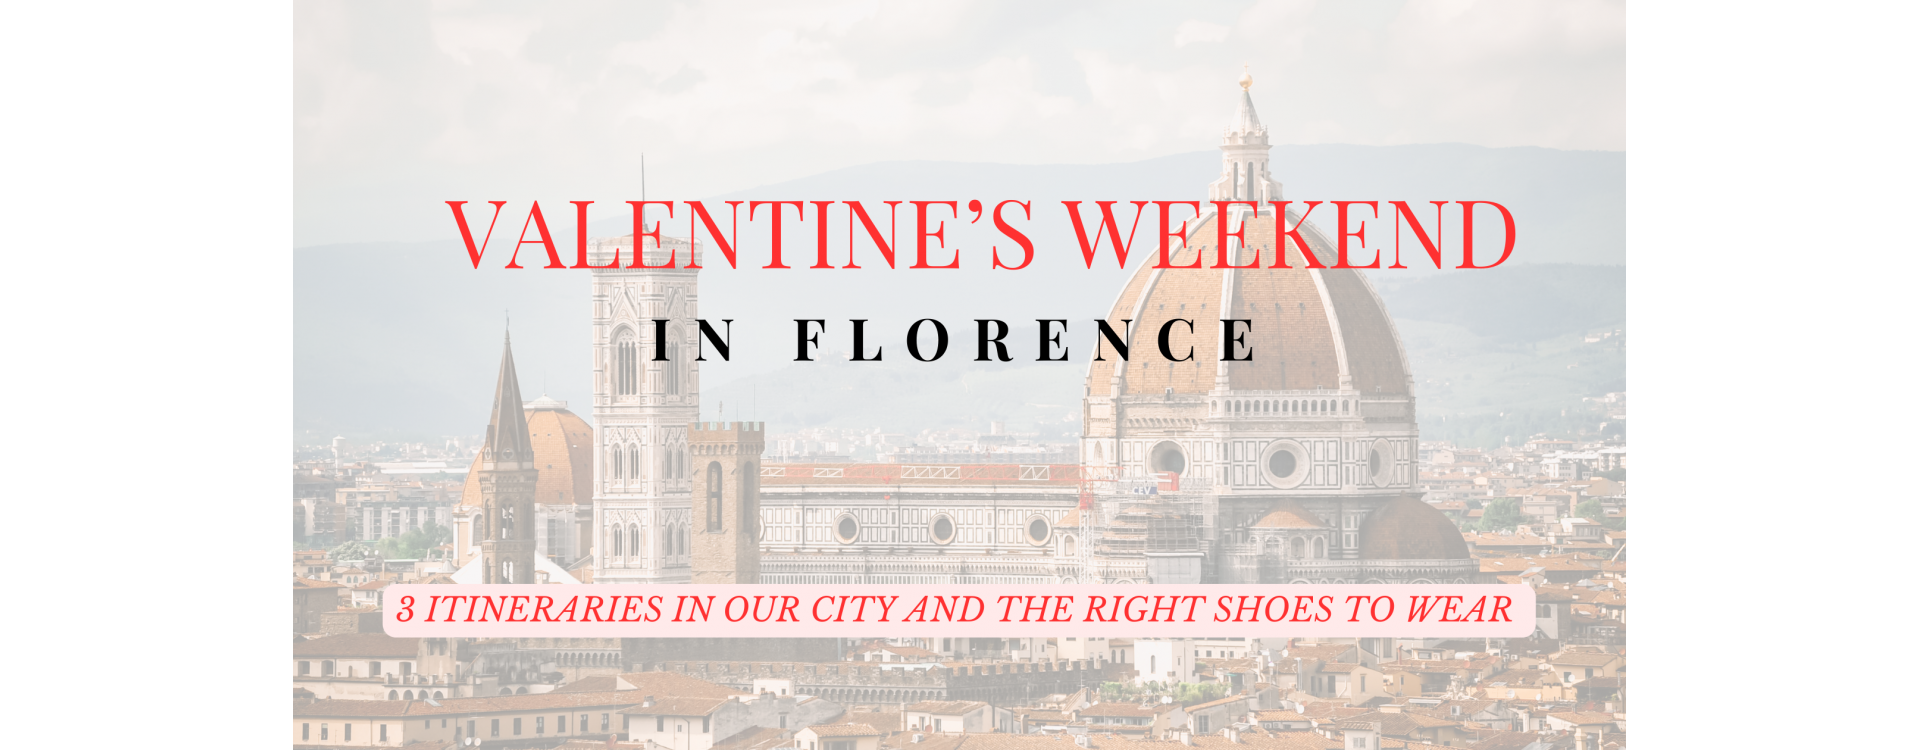 VALENTINE IN FLORENCE: 3 ITINERARIES AND THE RIGHT SHOES!